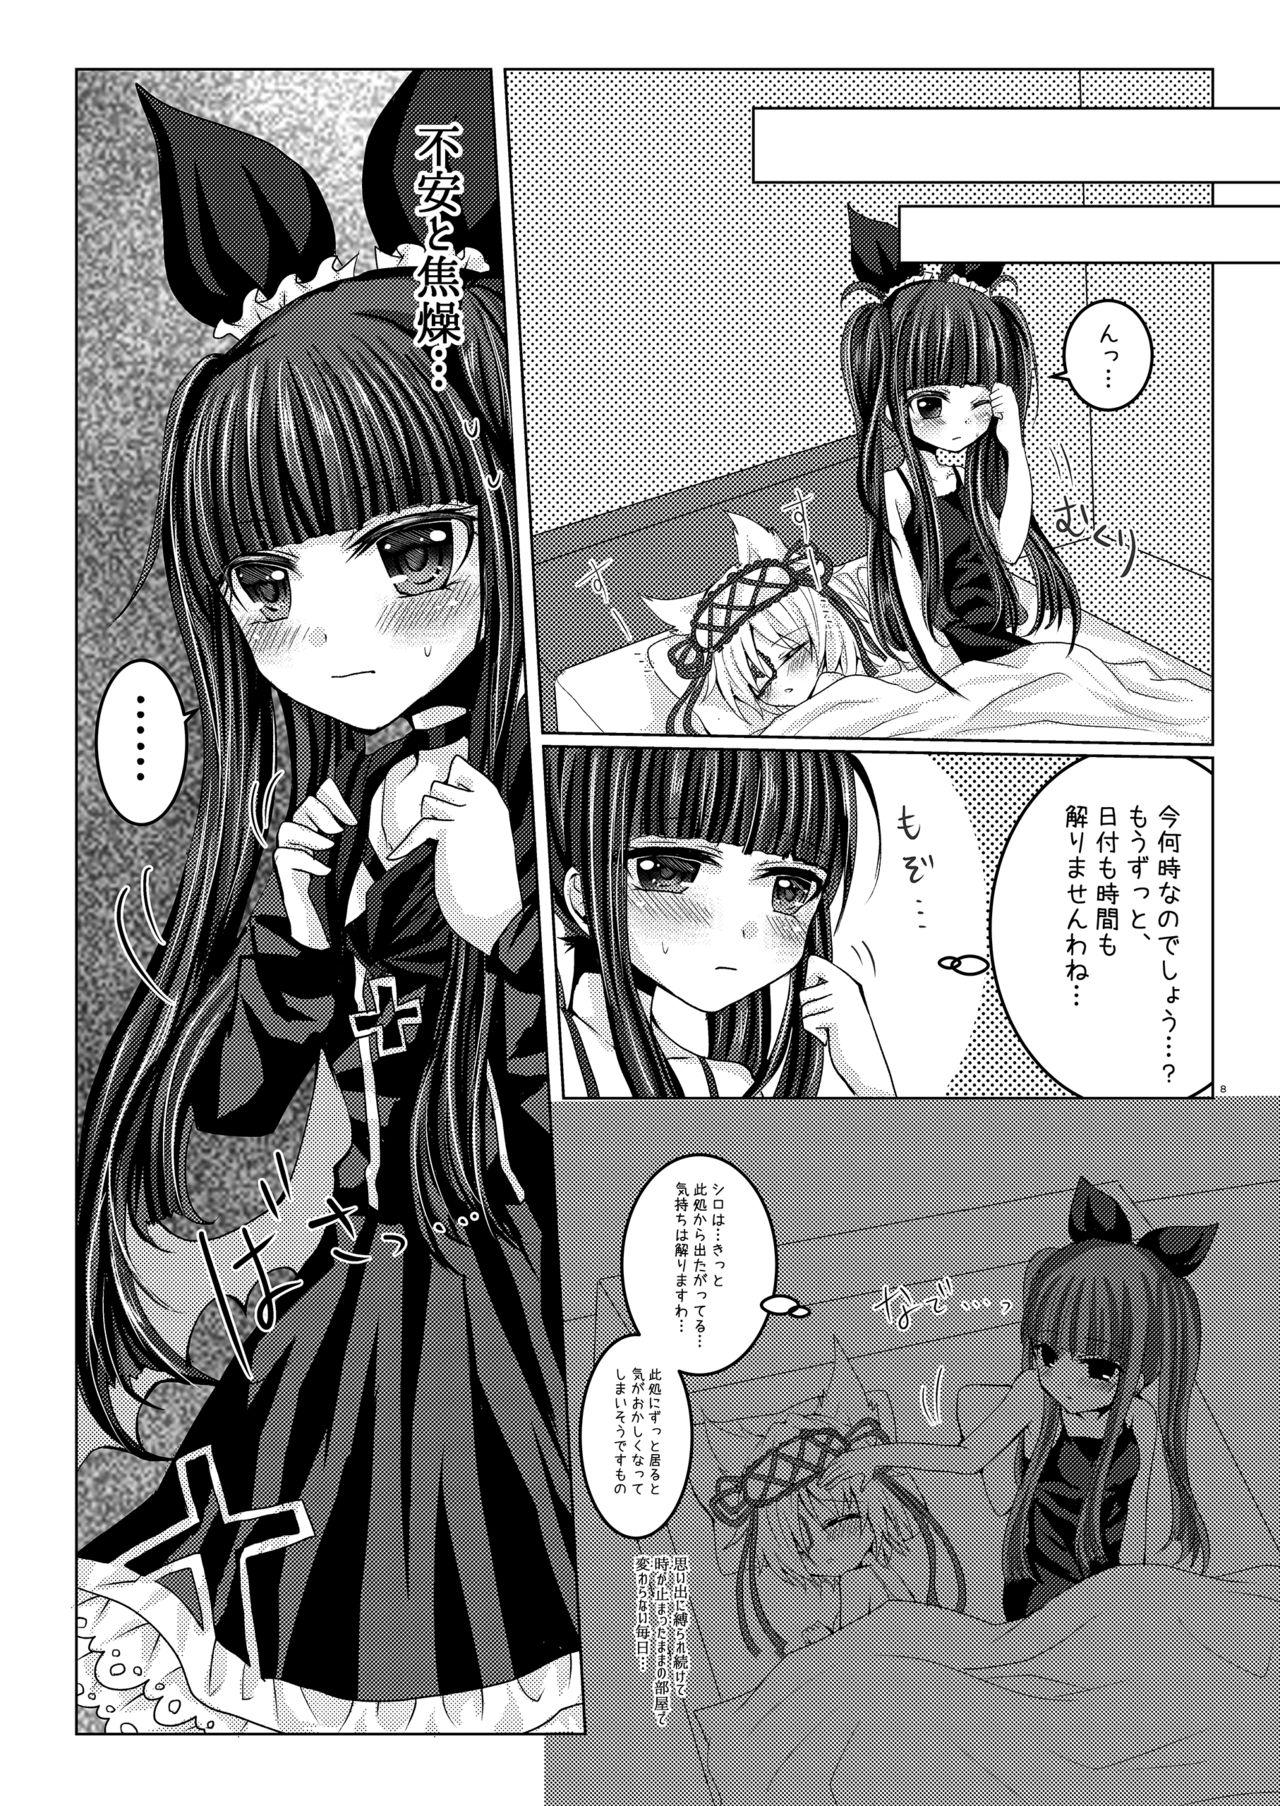 Gros Seins Torikago Shoujo - Emil chronicle online Cuckold - Page 7